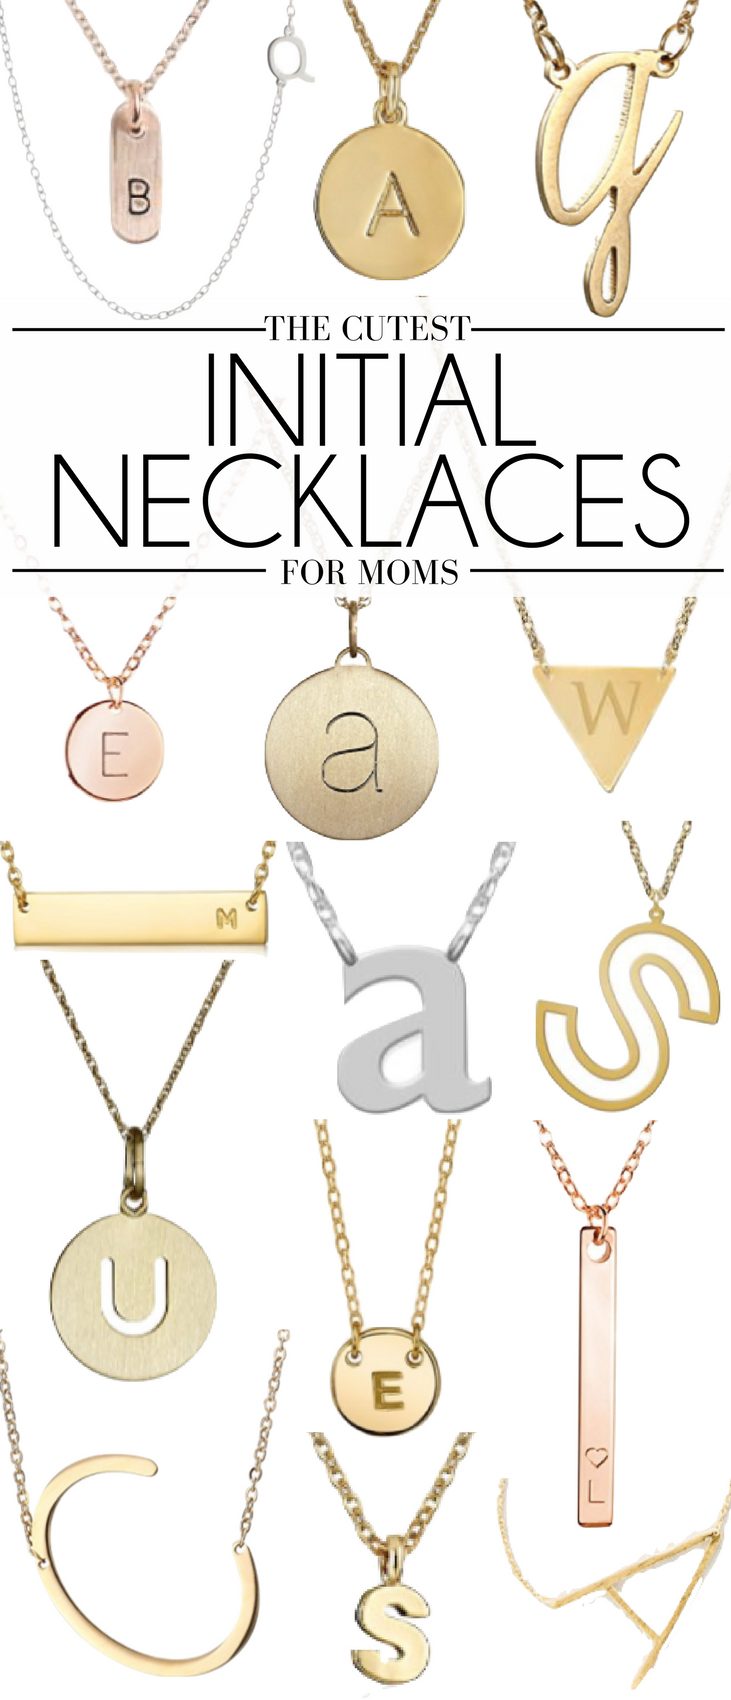 these are the cutest initial necklaces for moms - perfect jewelry for moms 